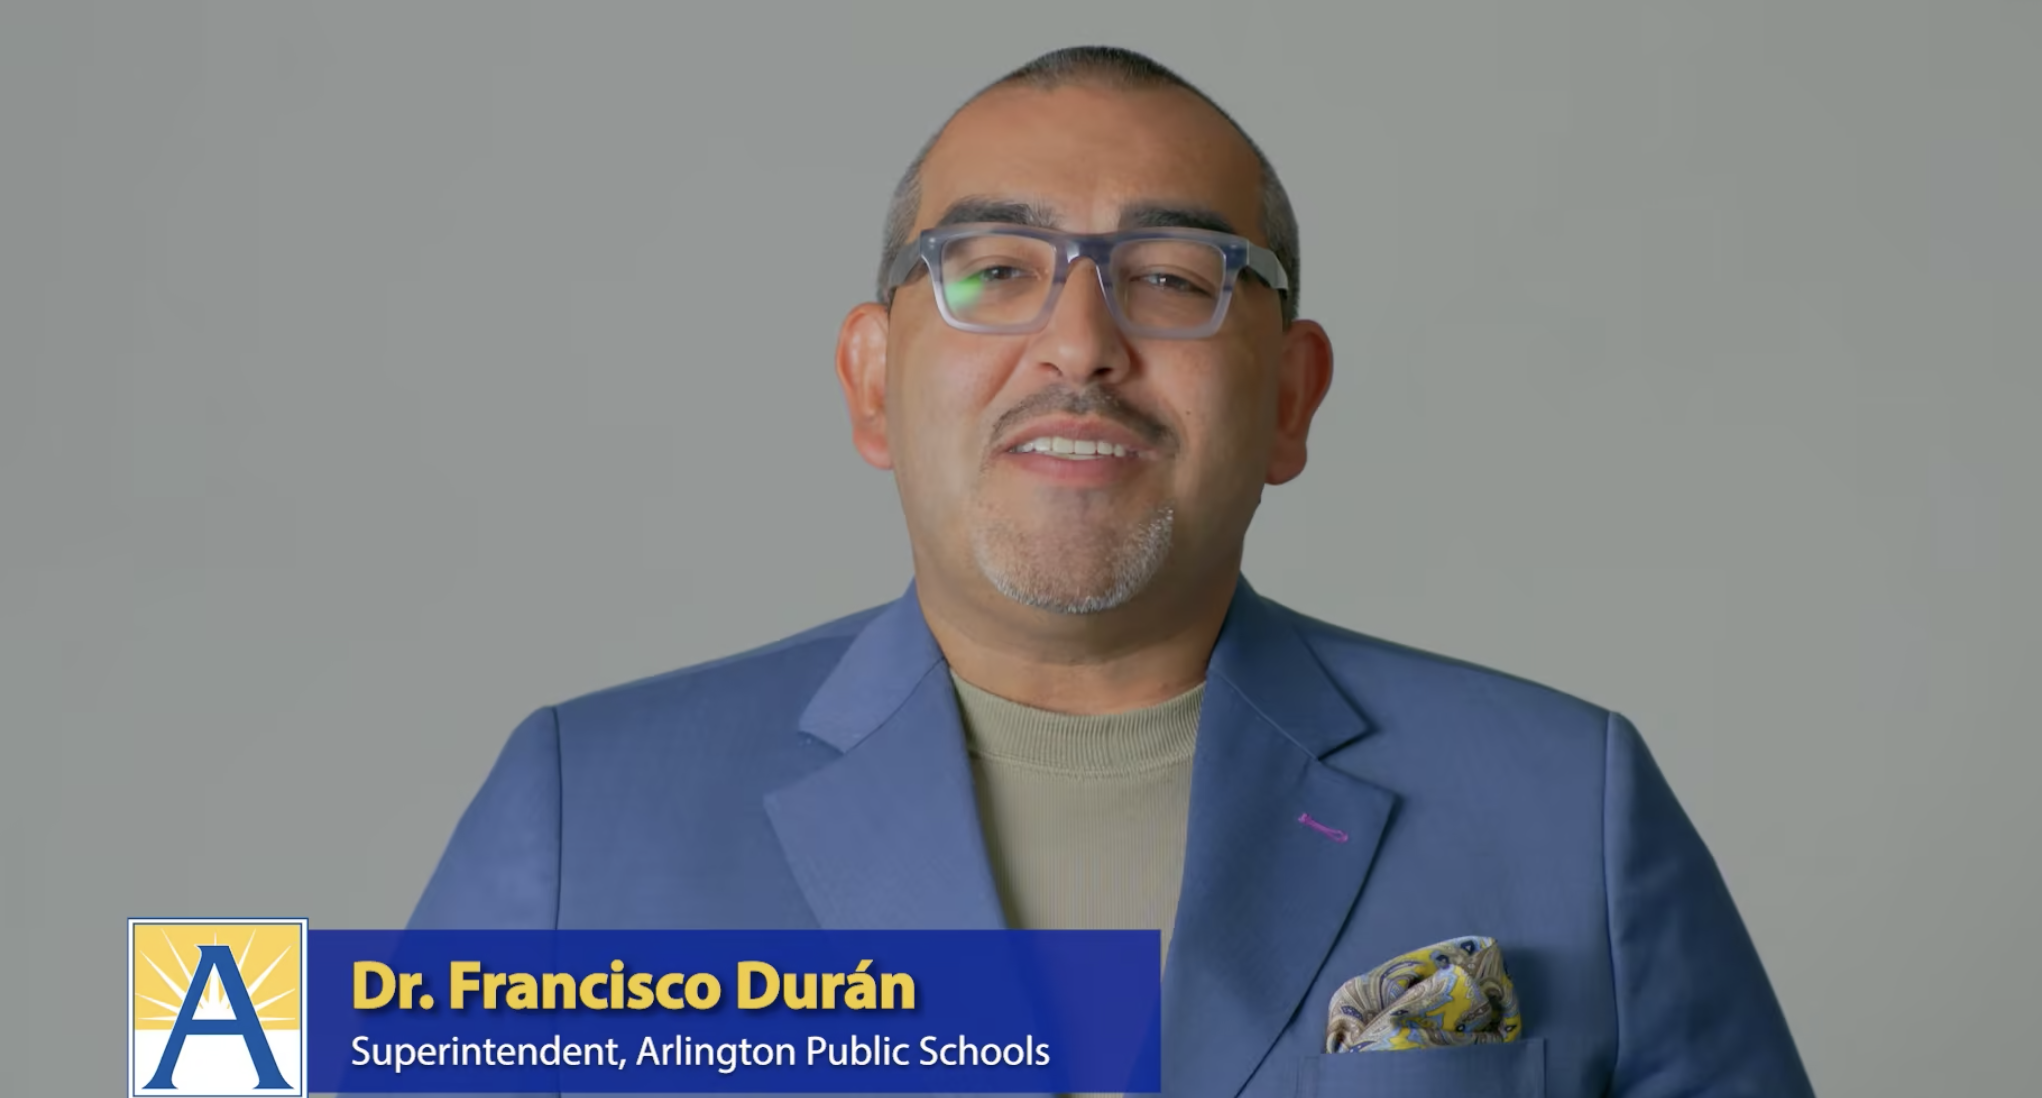 Dr. Francisco Durian